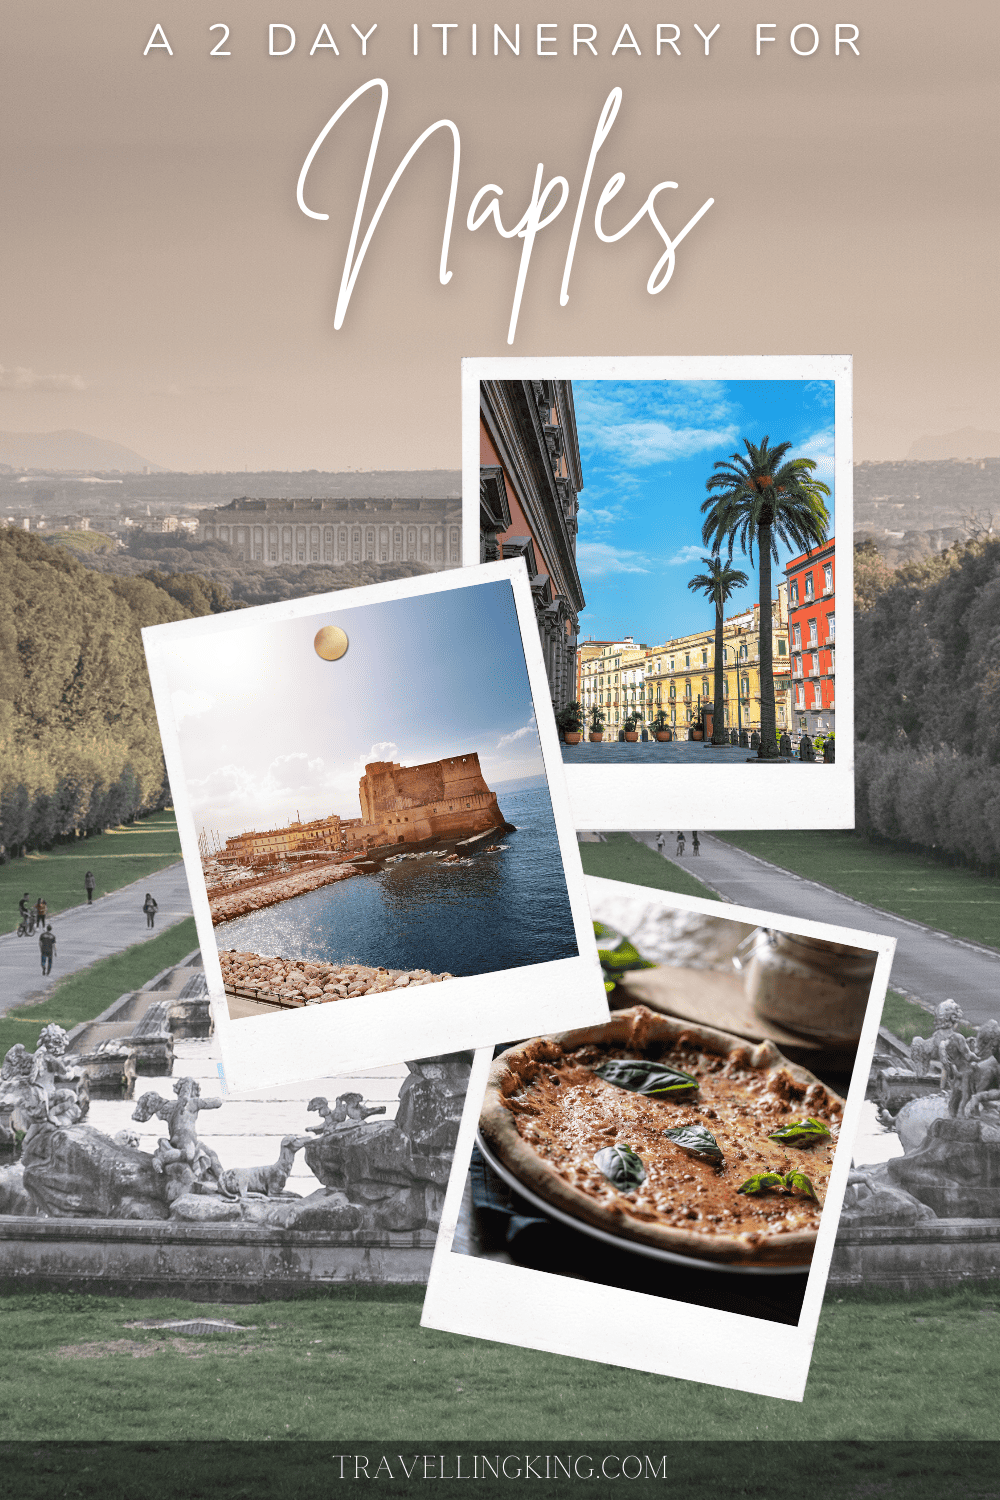 48 hours in Naples - A 2 day Itinerary